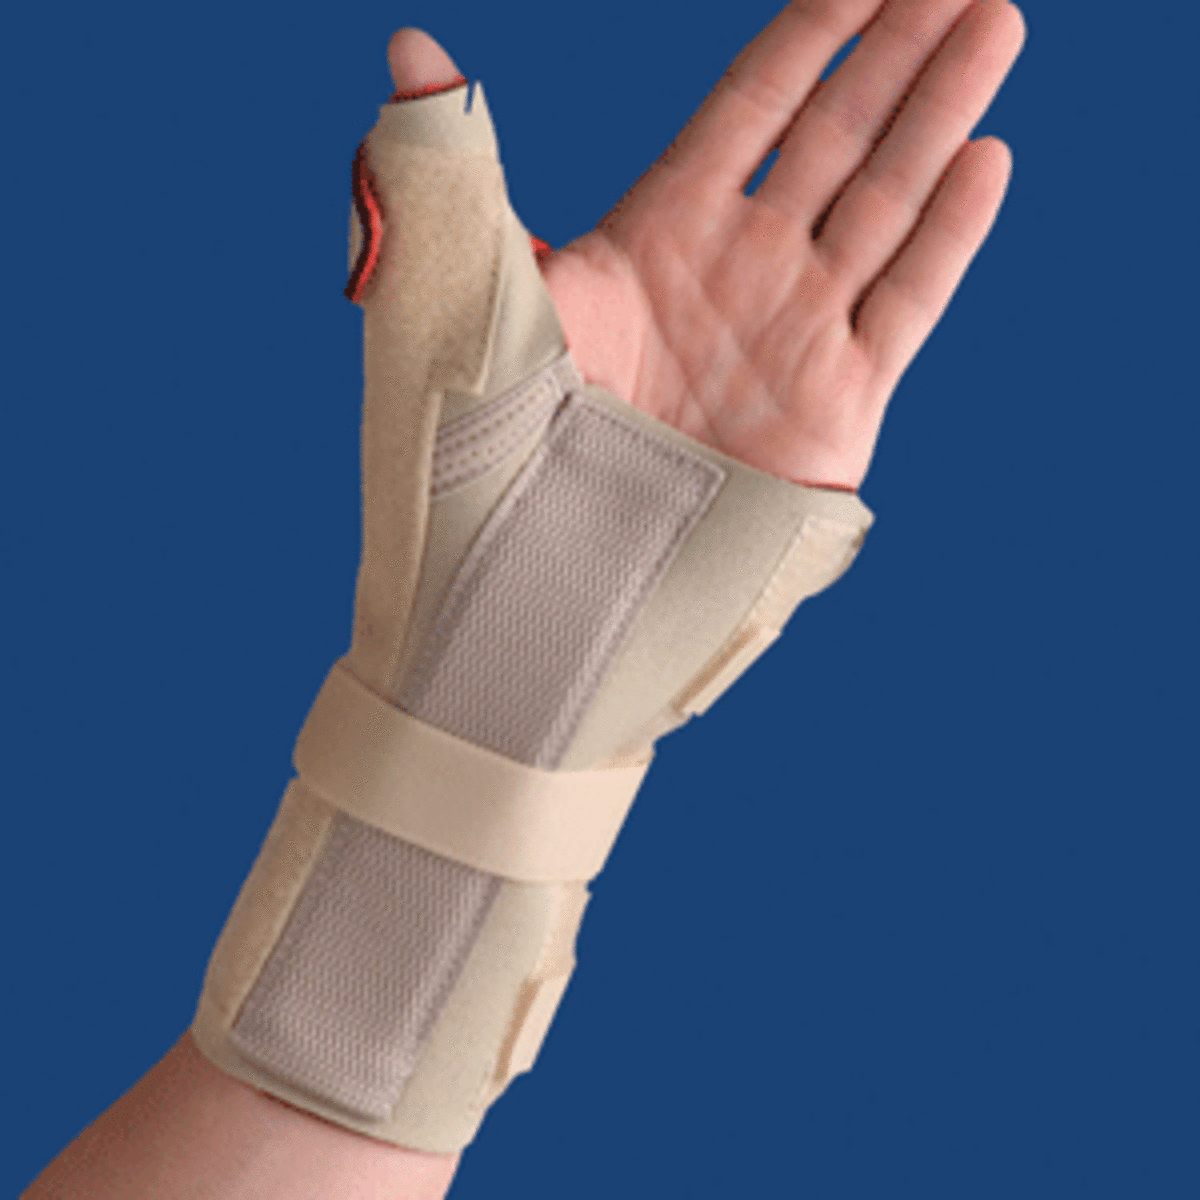 Wrist brace for Carpal Tunnel Syndrome